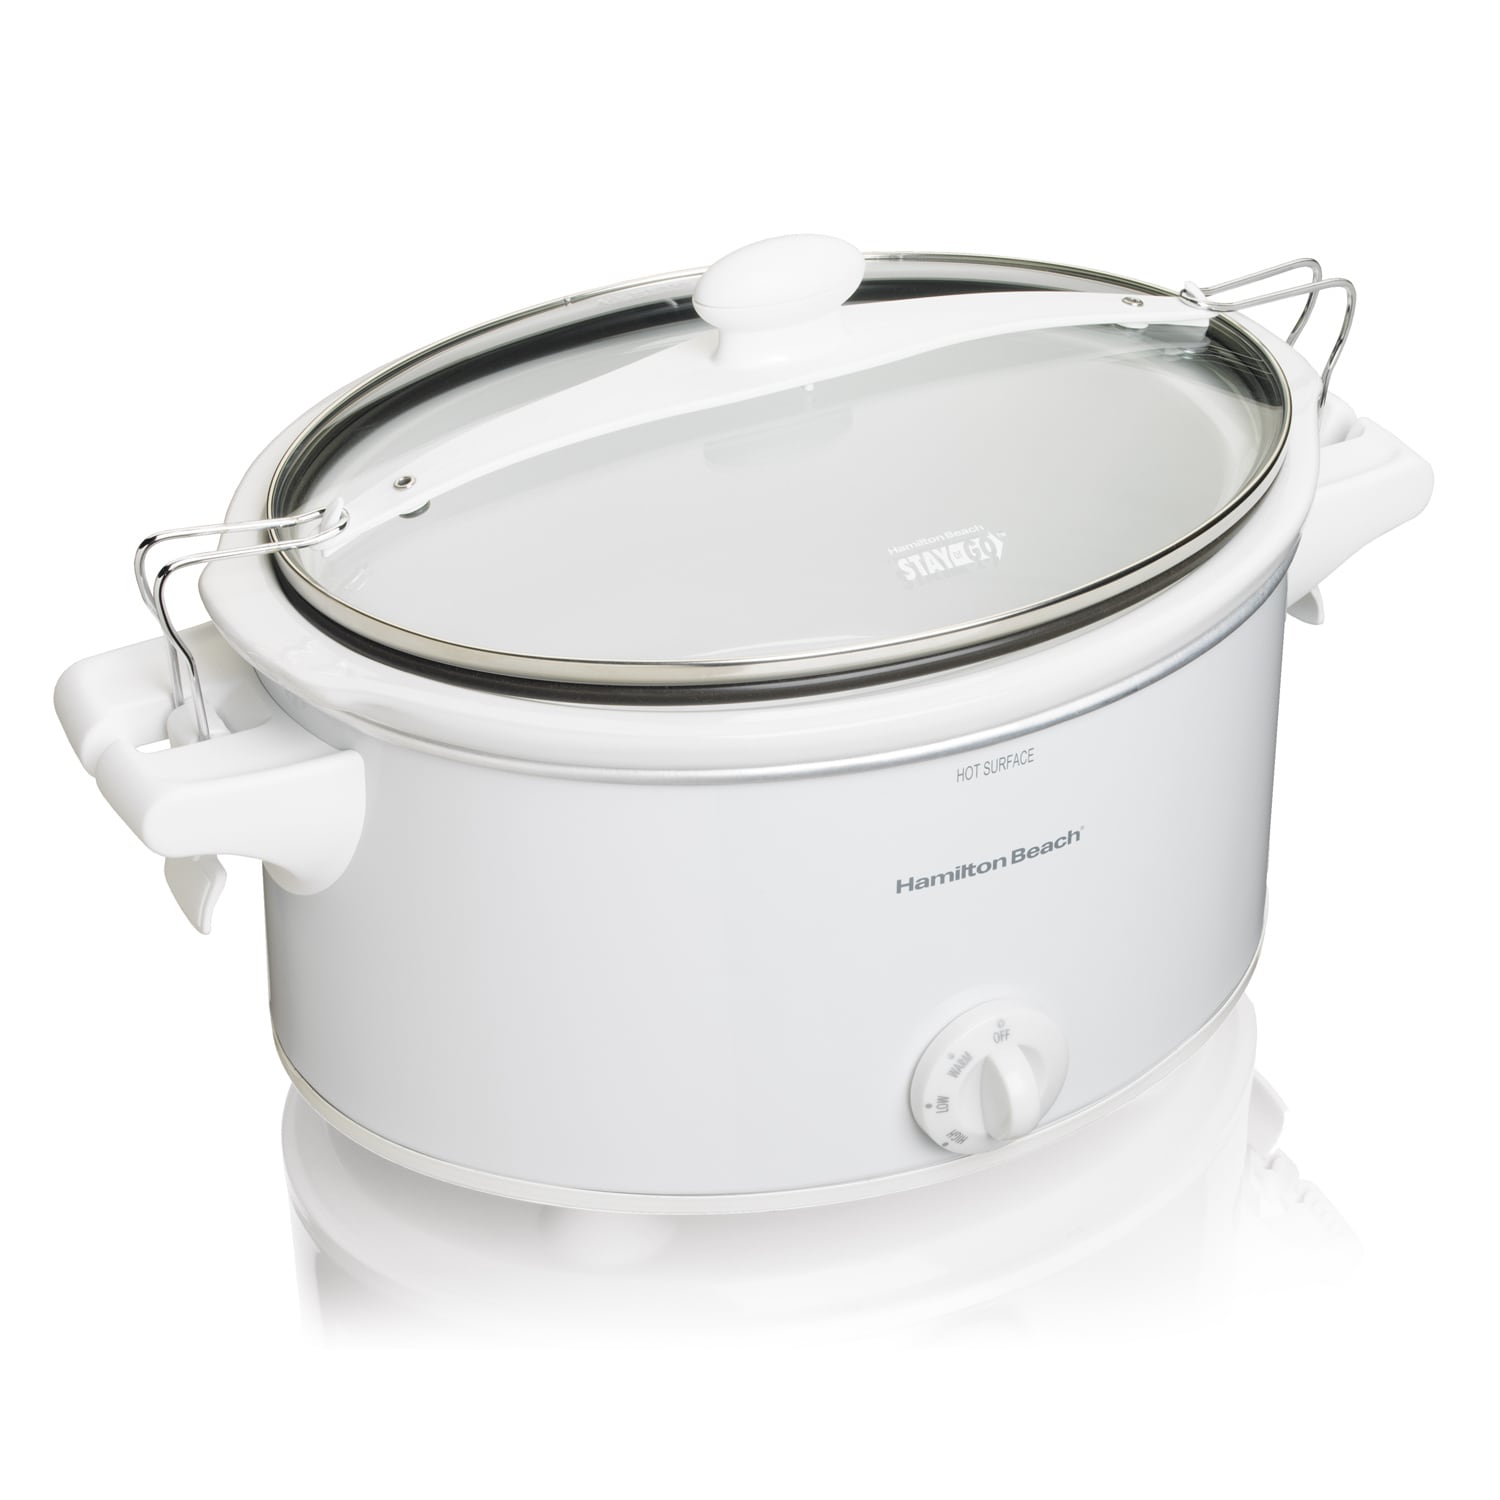 https://ak1.ostkcdn.com/images/products/6075068/Hamilton-Beach-33263-White-Stay-or-Go-6-Quart-Slowcooker-4171f6a5-0d95-4ee6-afbe-40292c9d10a5.jpg